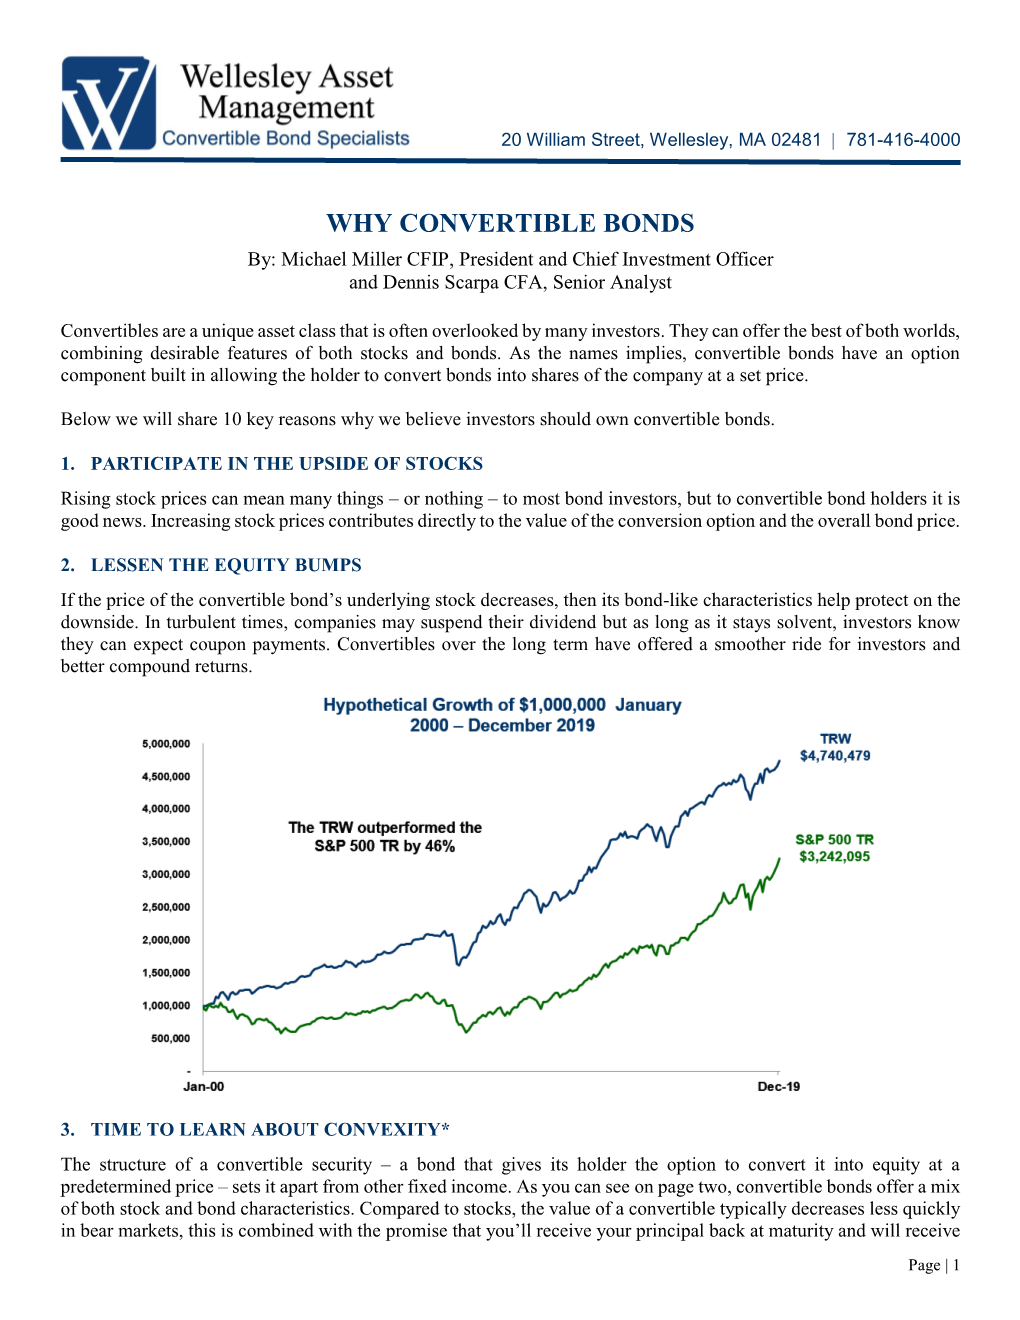 WHY CONVERTIBLE BONDS By: Michael Miller CFIP, President and Chief Investment Officer and Dennis Scarpa CFA, Senior Analyst